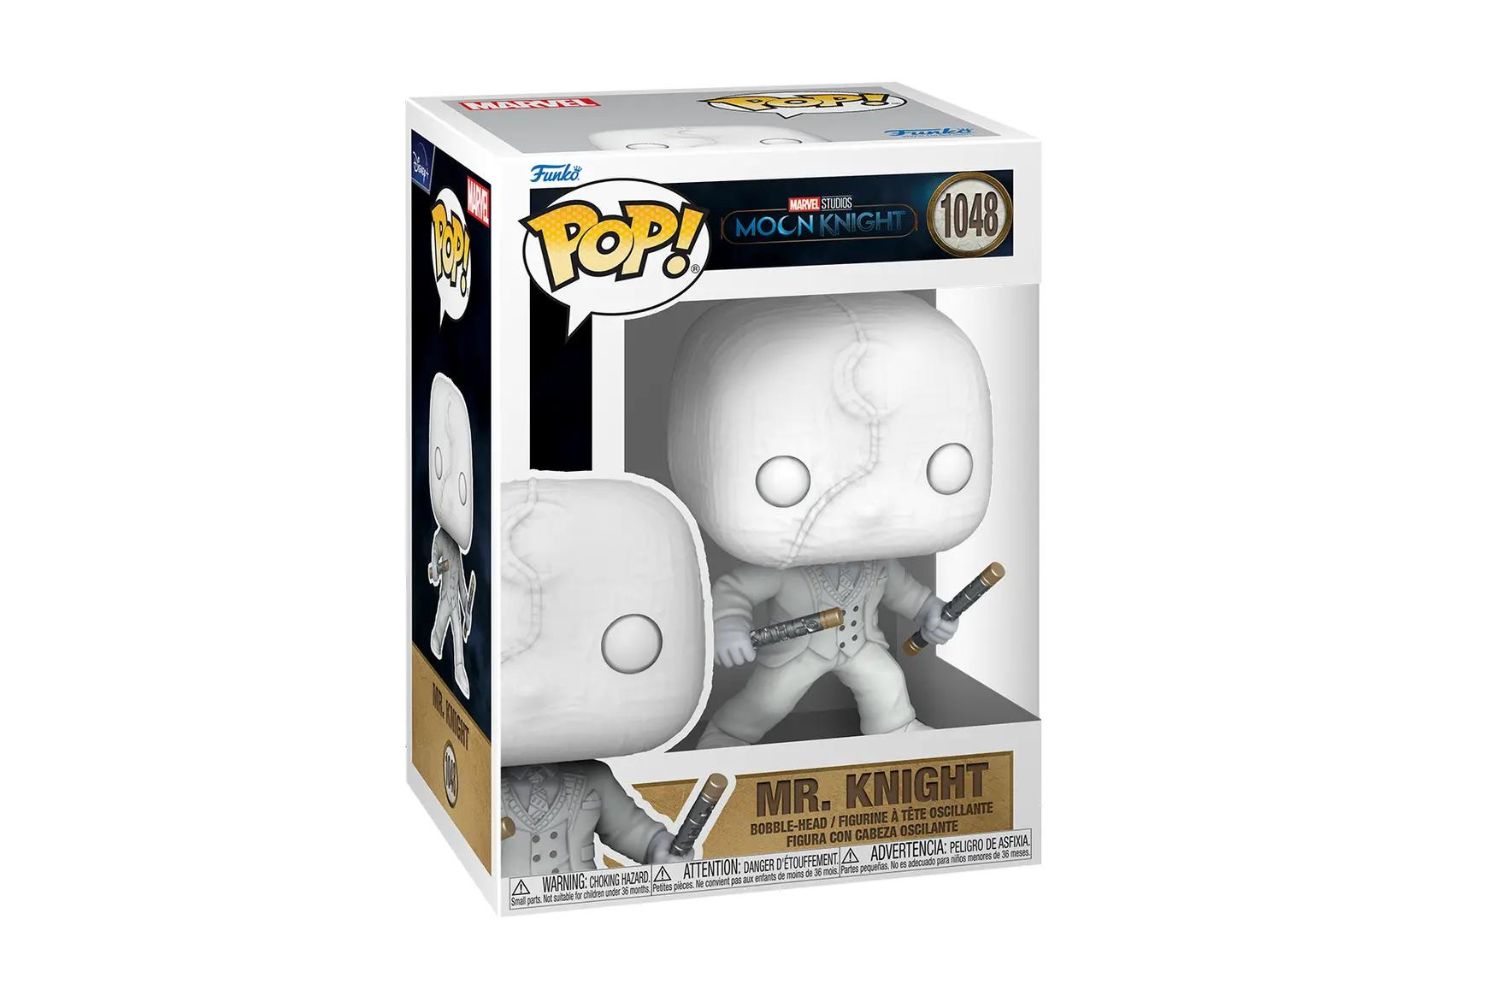 20-surprising-facts-about-moon-knight-funko-pop